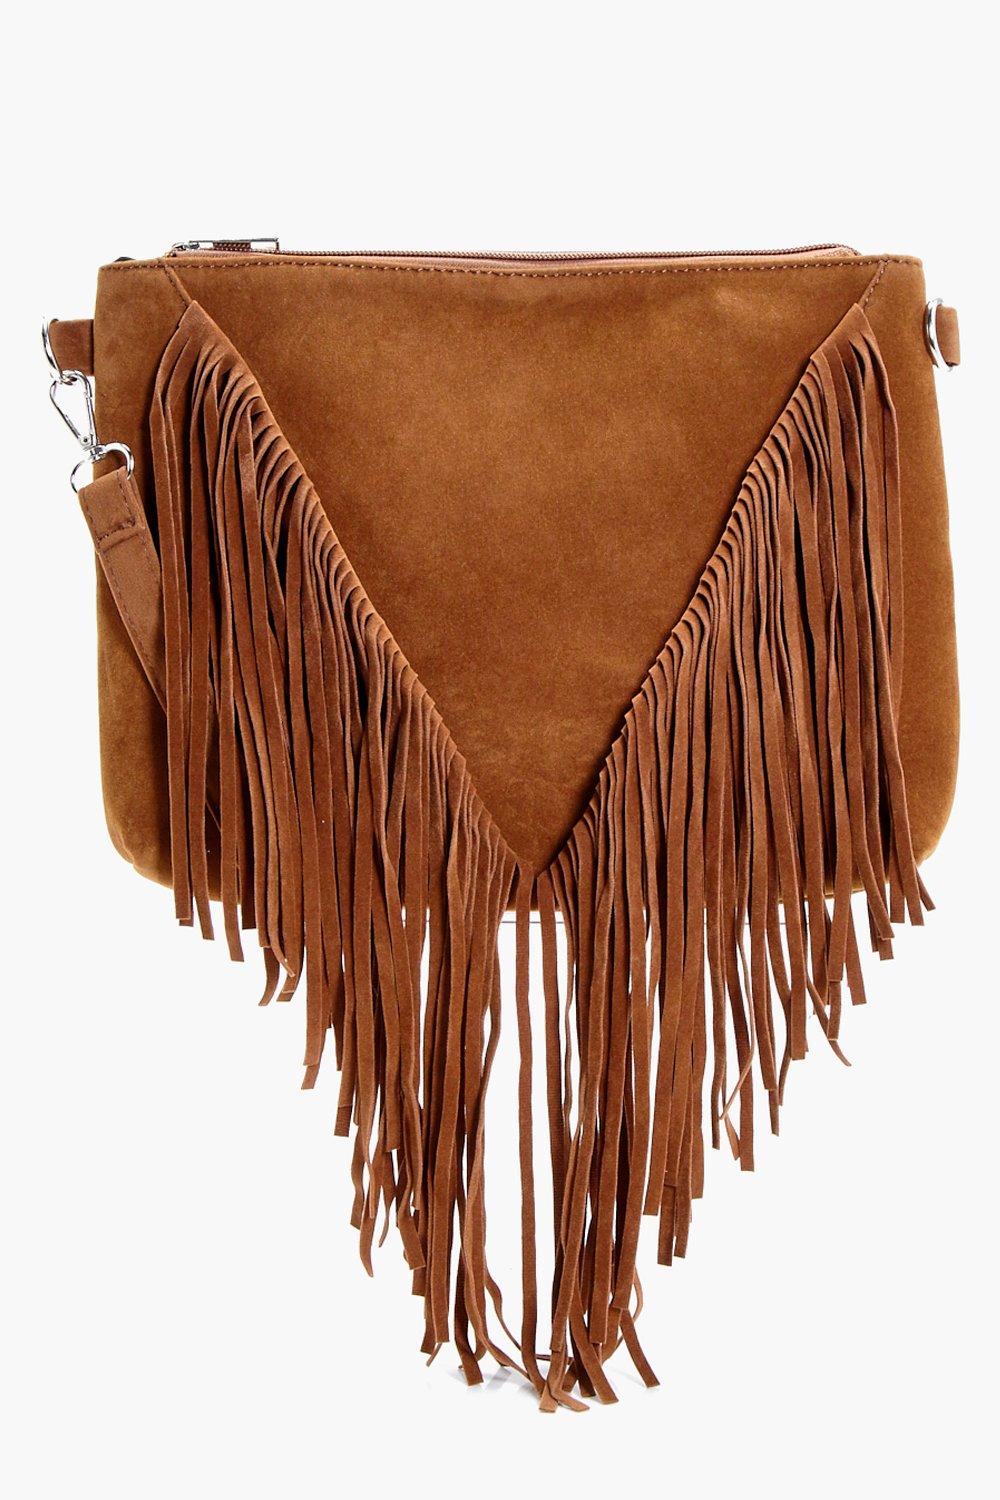 Womens Suedette Fringed Crossbody Bag - Brown - One Size, Brown